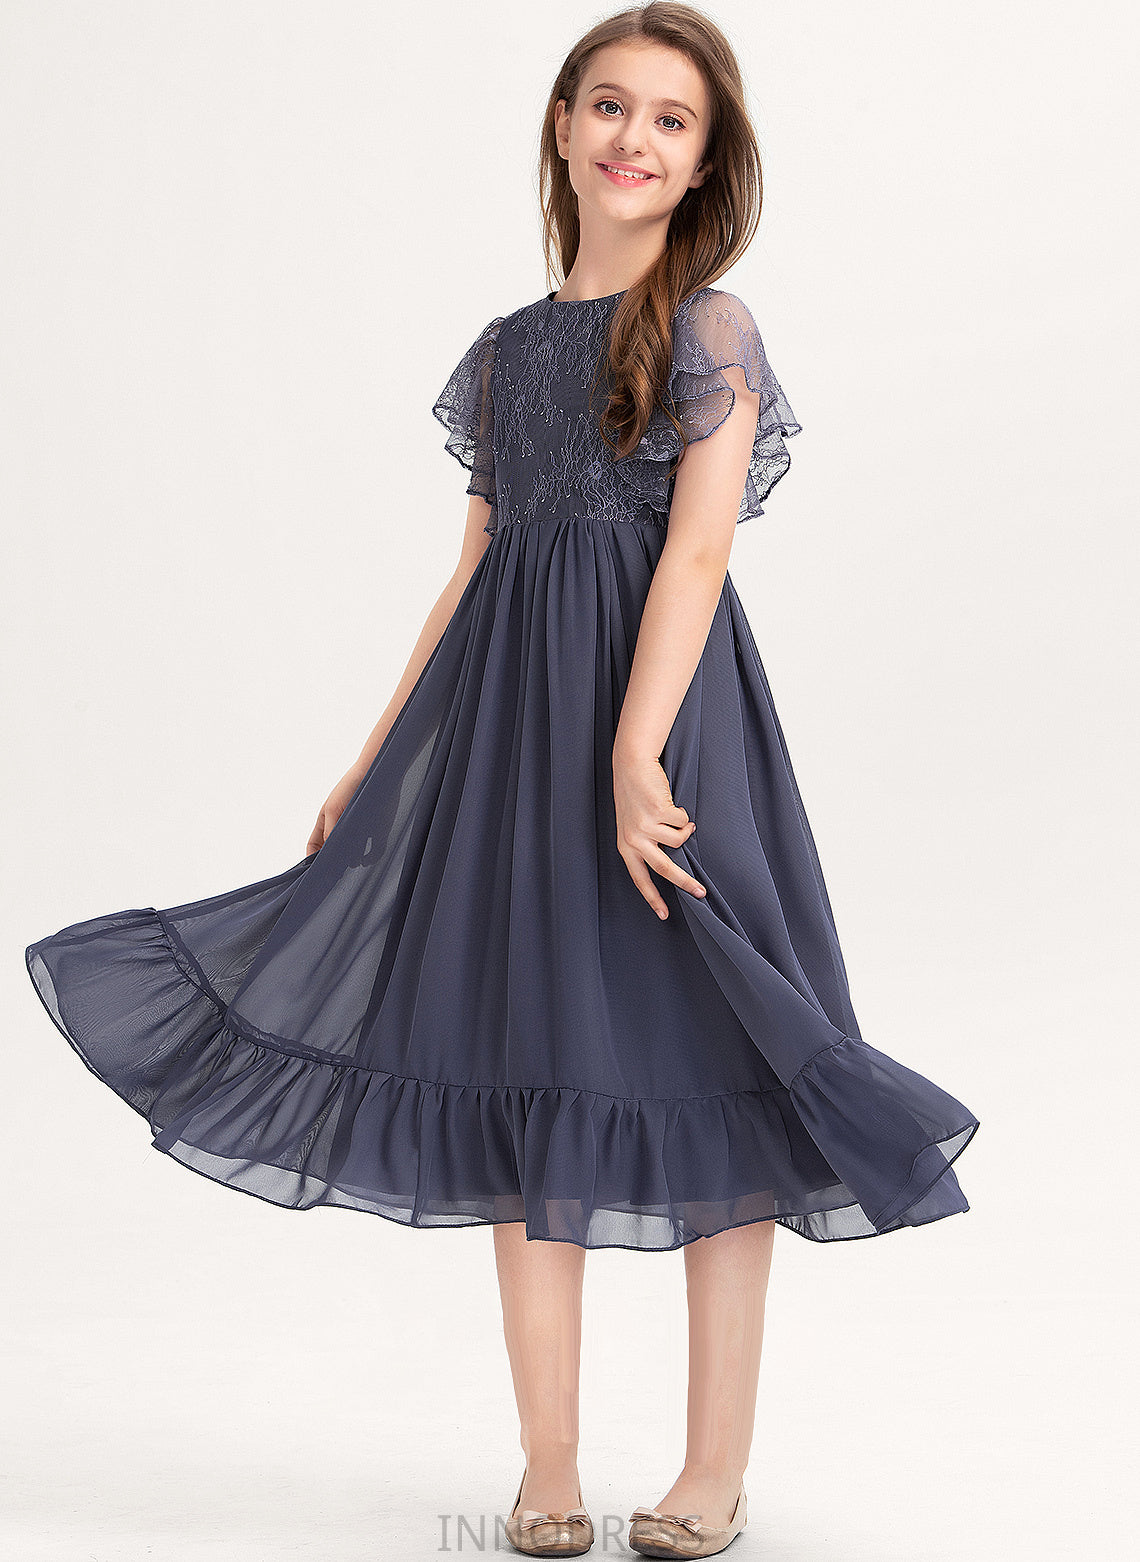 Lace Junior Bridesmaid Dresses With Scoop Cascading Denise Neck Knee-Length A-Line Ruffles Chiffon